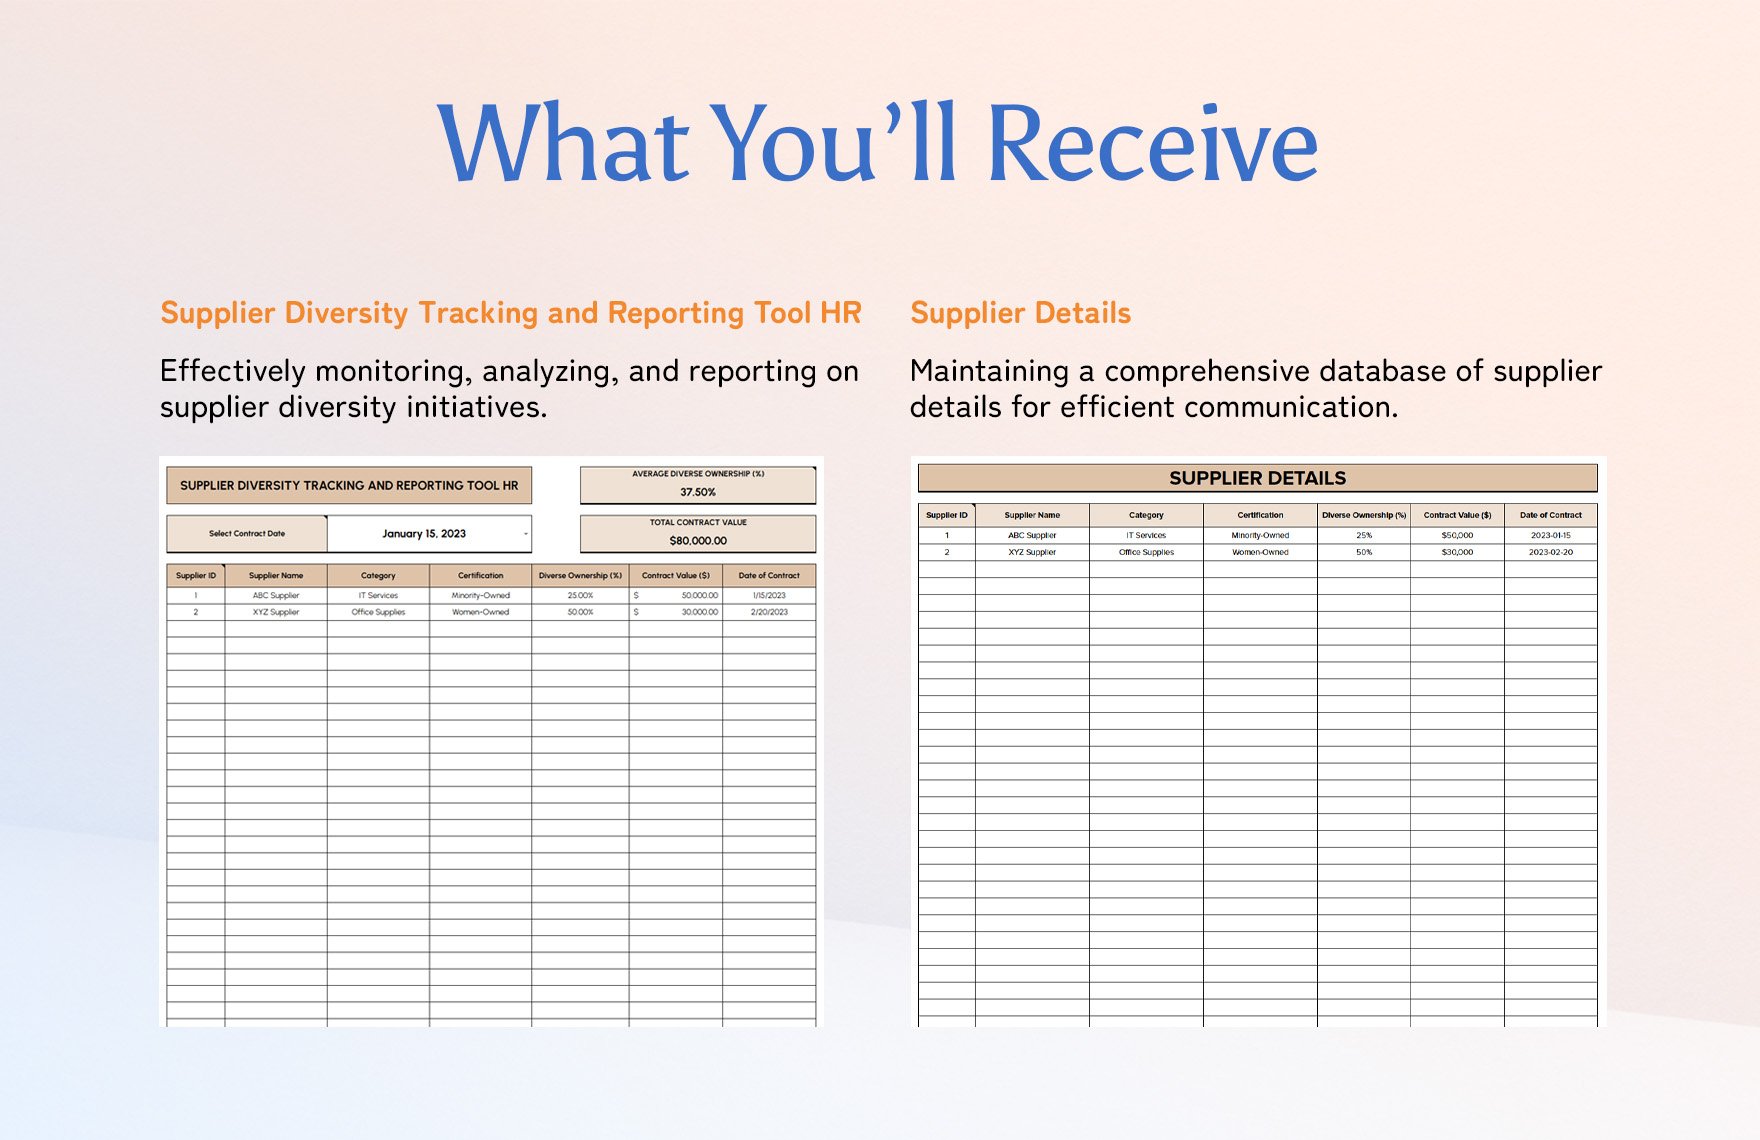 Supplier Diversity Tracking and Reporting Tool HR Template